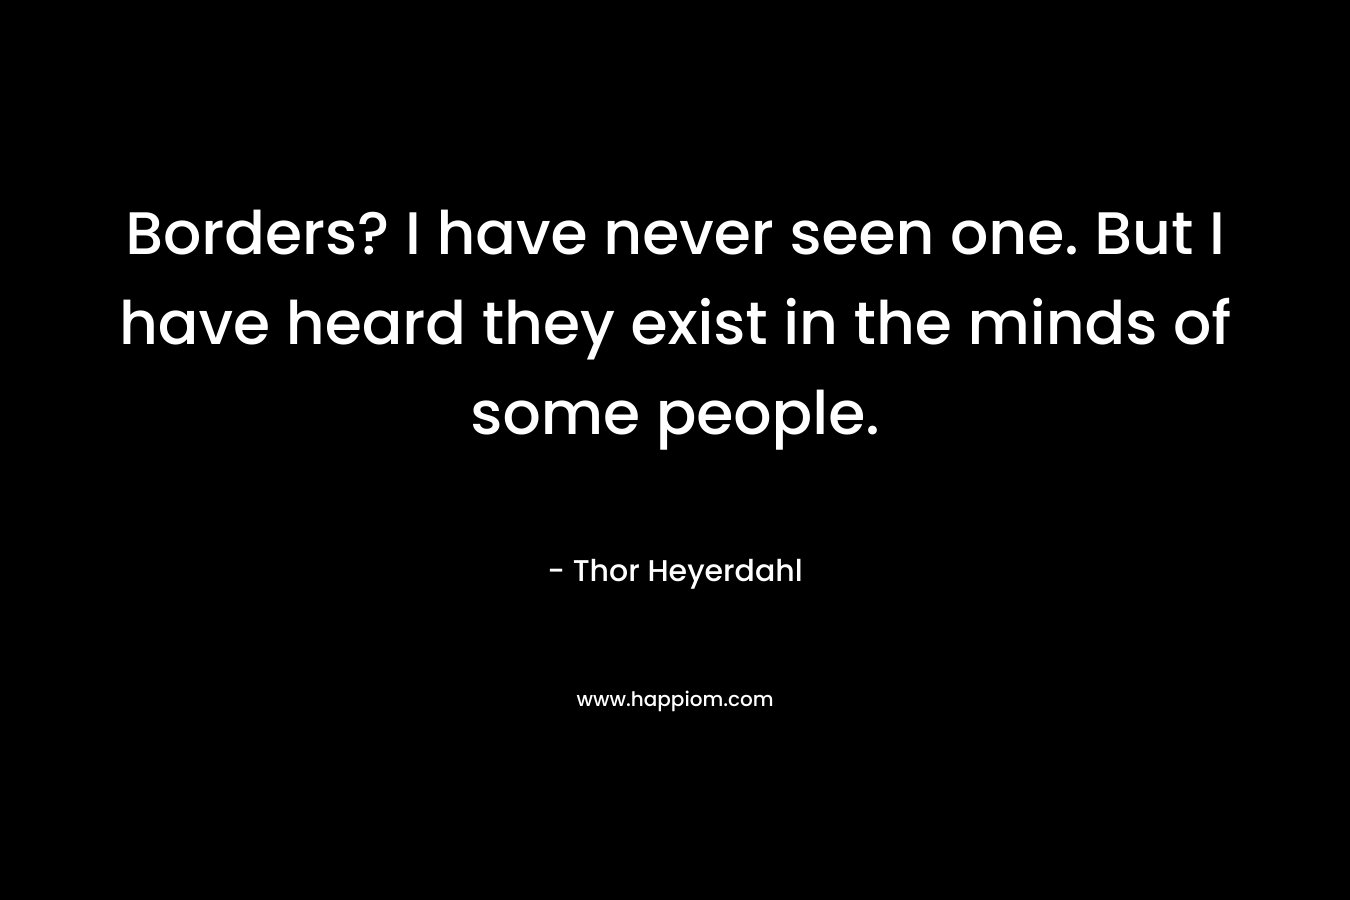 Borders? I have never seen one. But I have heard they exist in the minds of some people. – Thor Heyerdahl